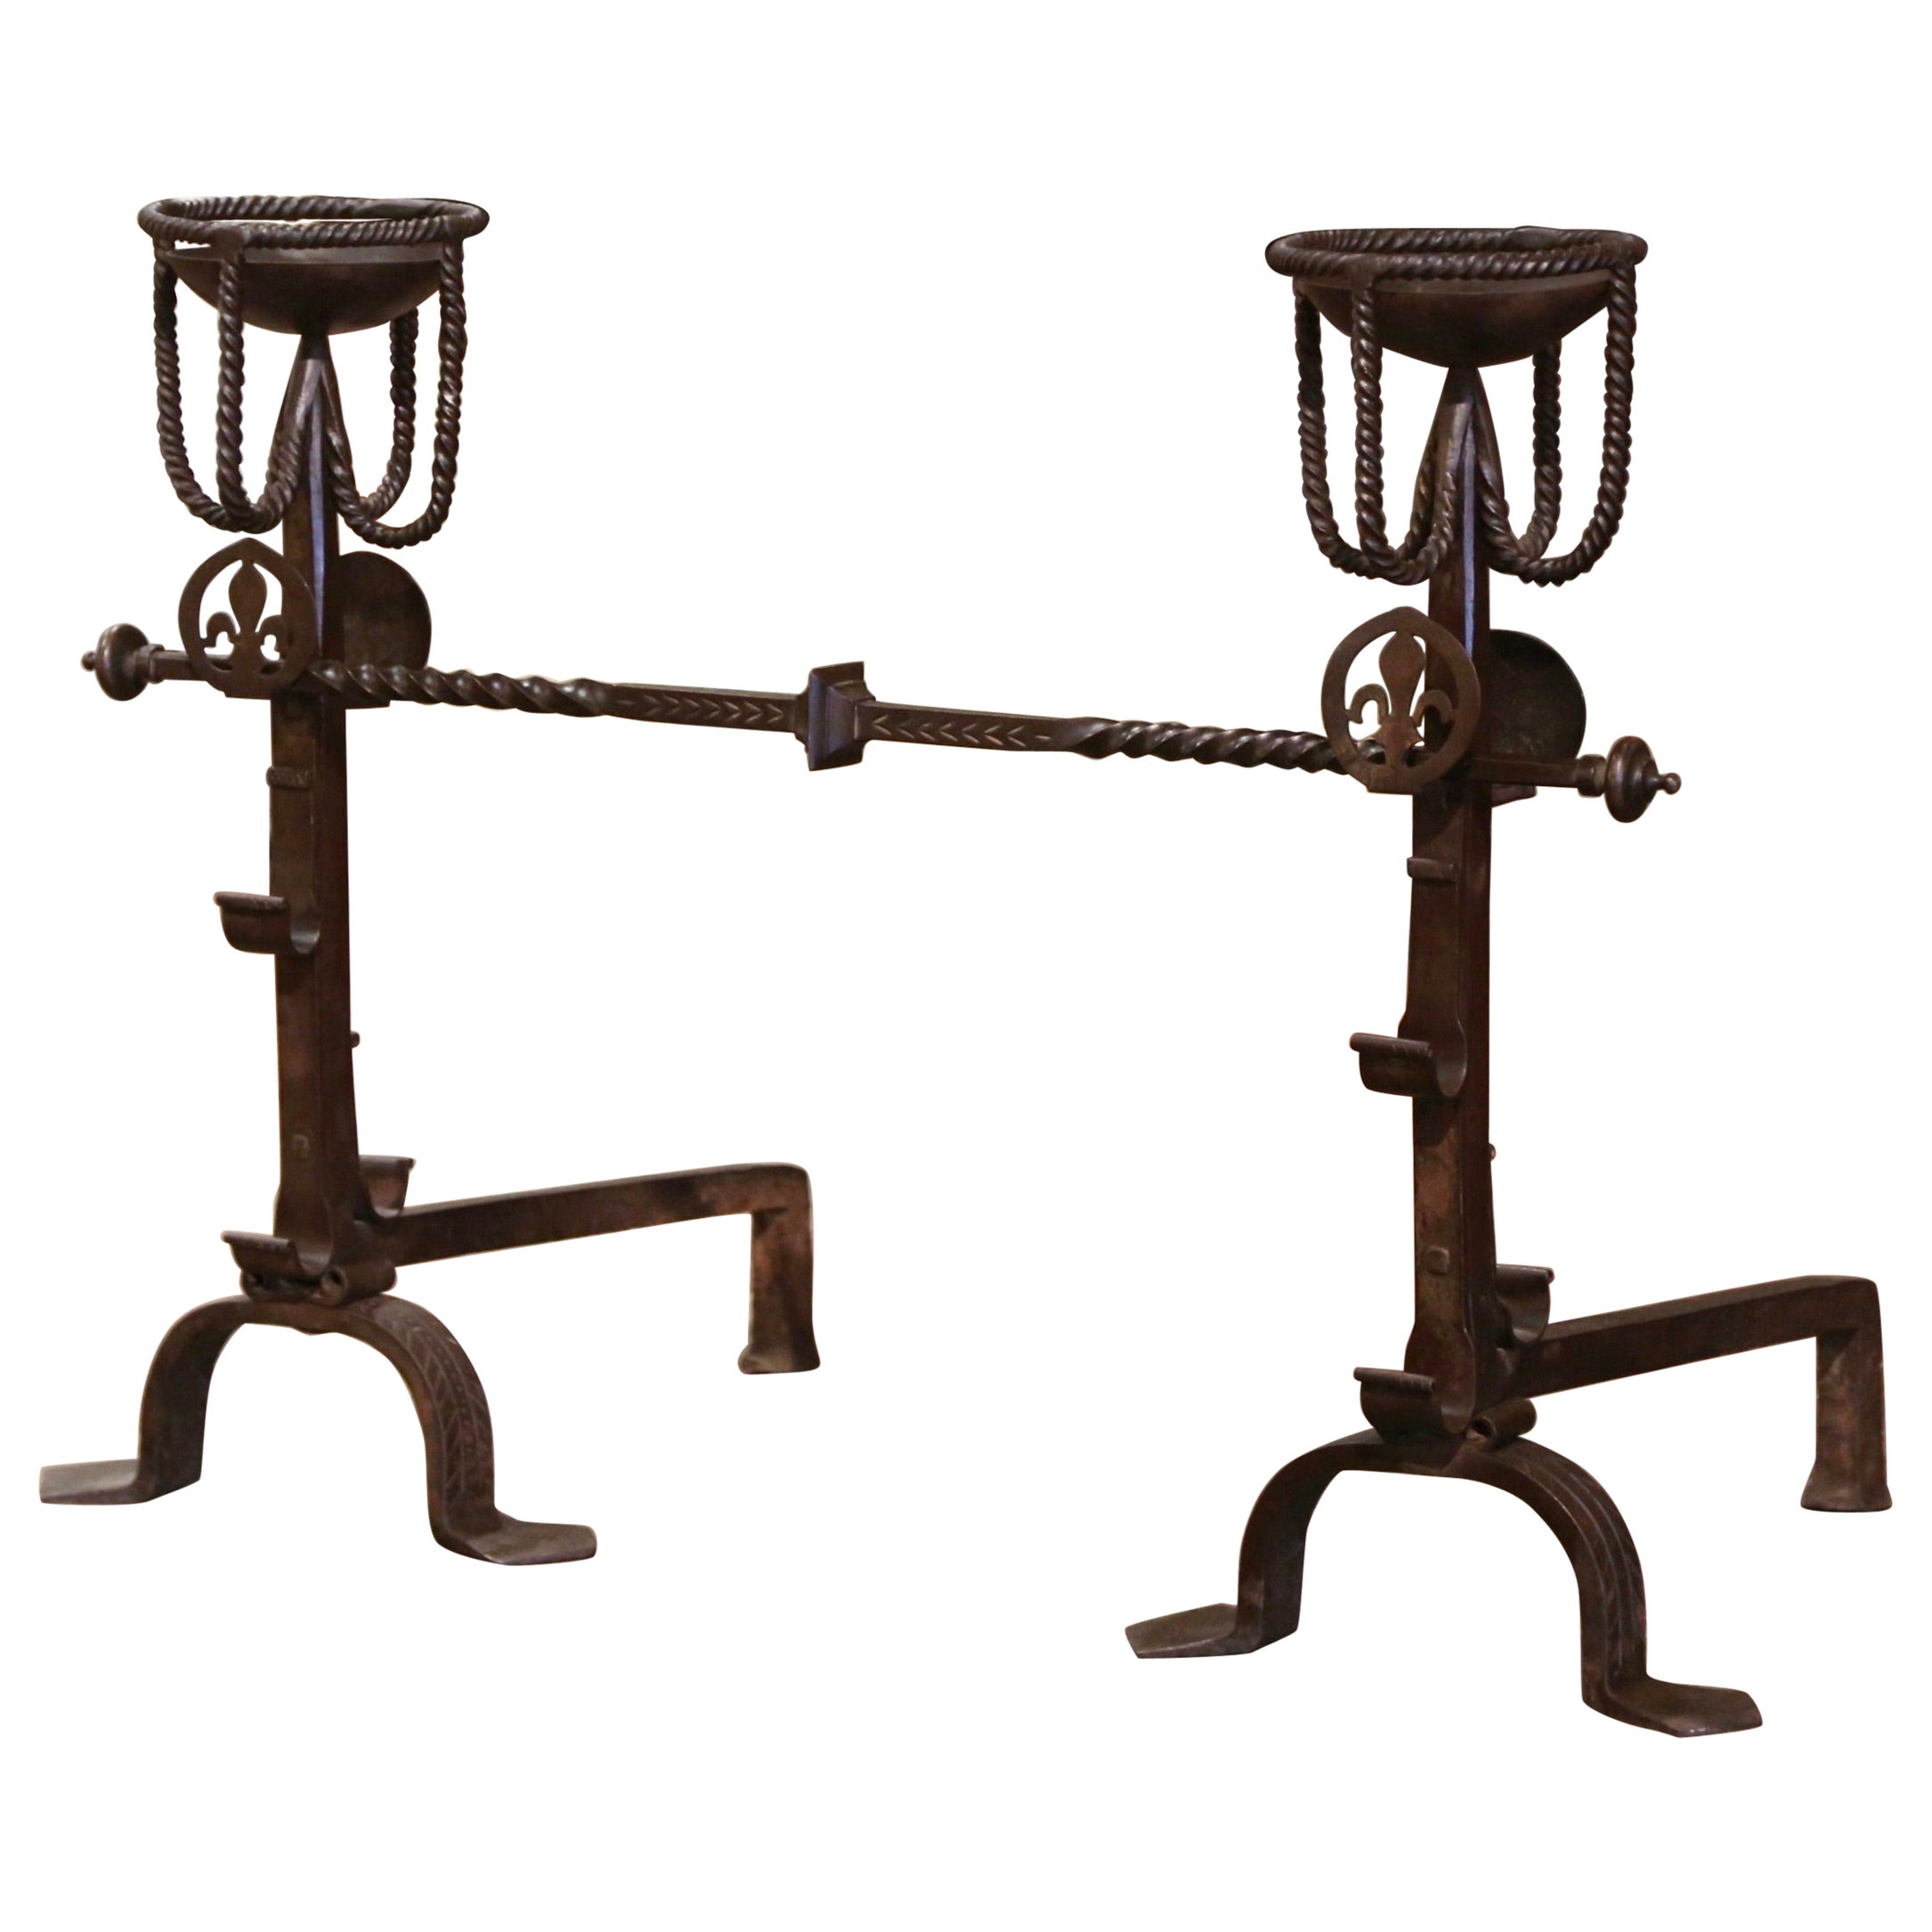 Pair of 19th Century French Wrought Iron “Landiers” Andirons with Fleur de Lys For Sale